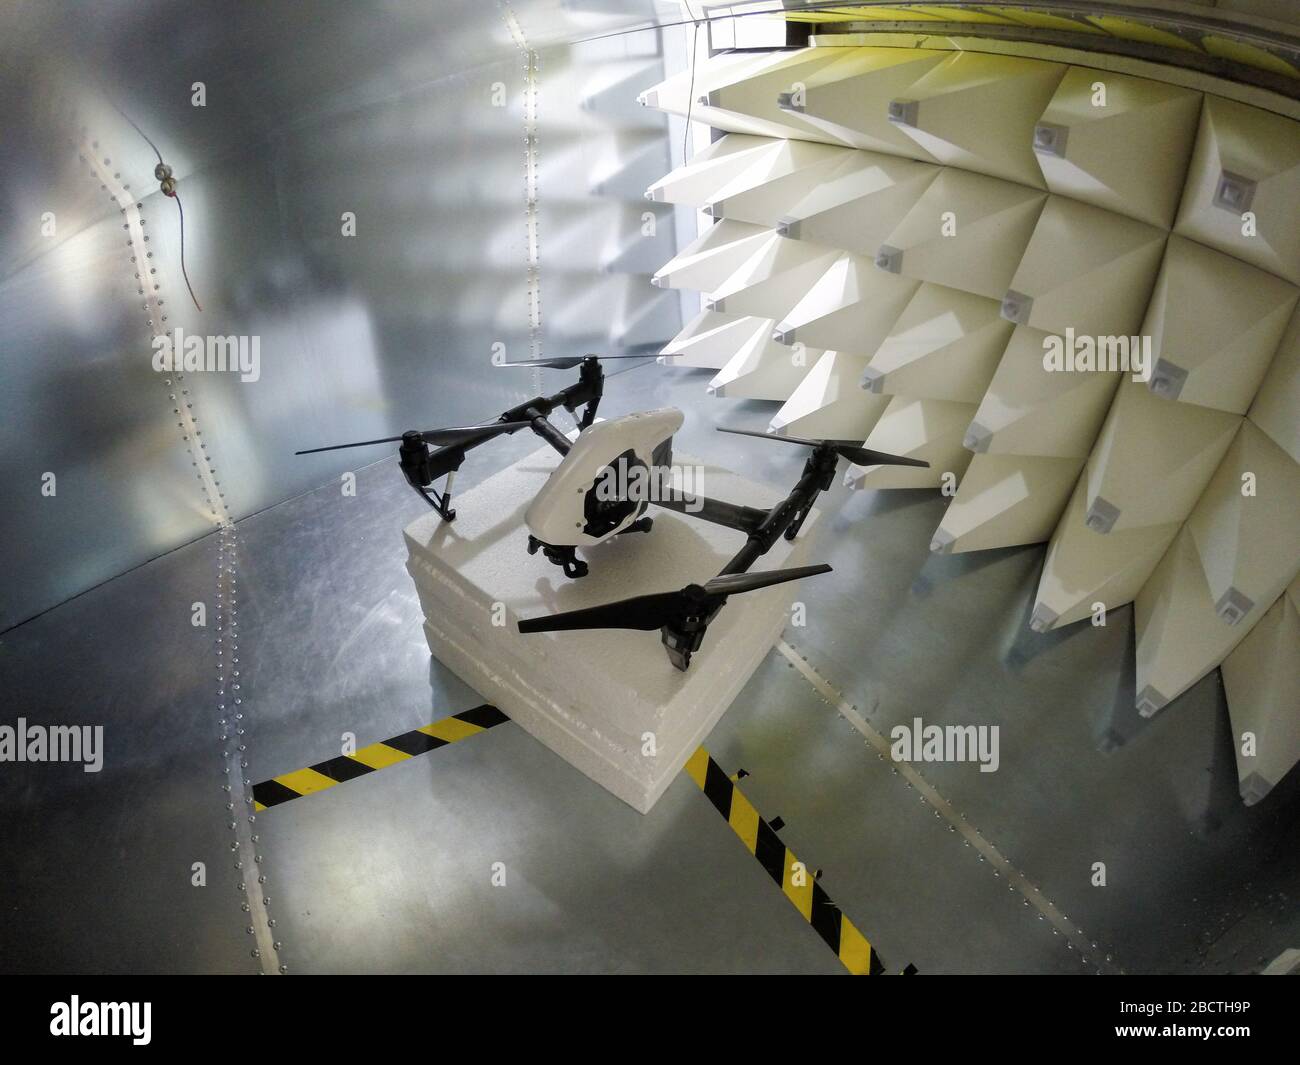 Quadcopter drone electromagnetic compatibility testing inside GTEM cell Stock Photo